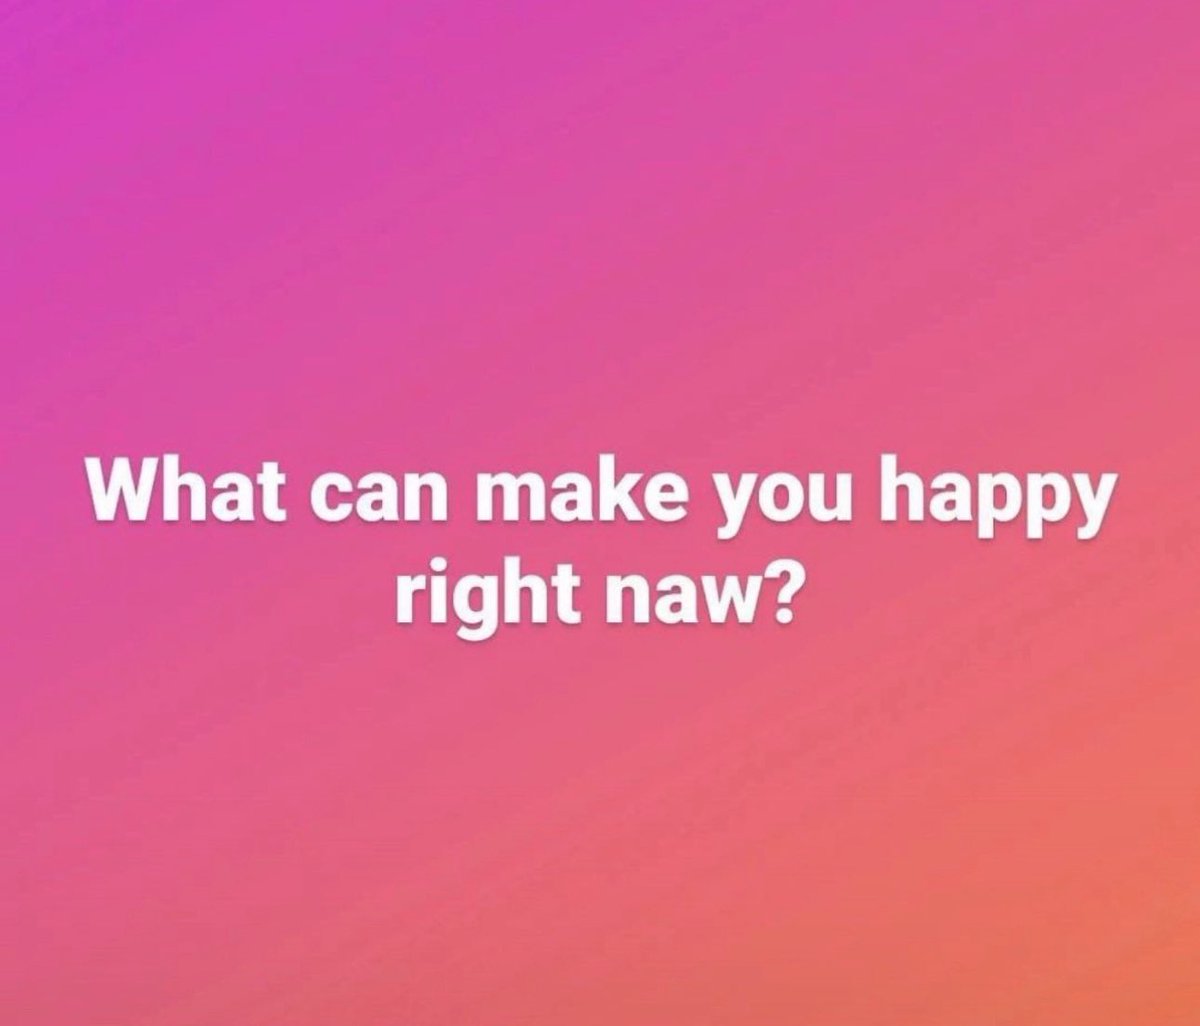 What can make you happy right now?